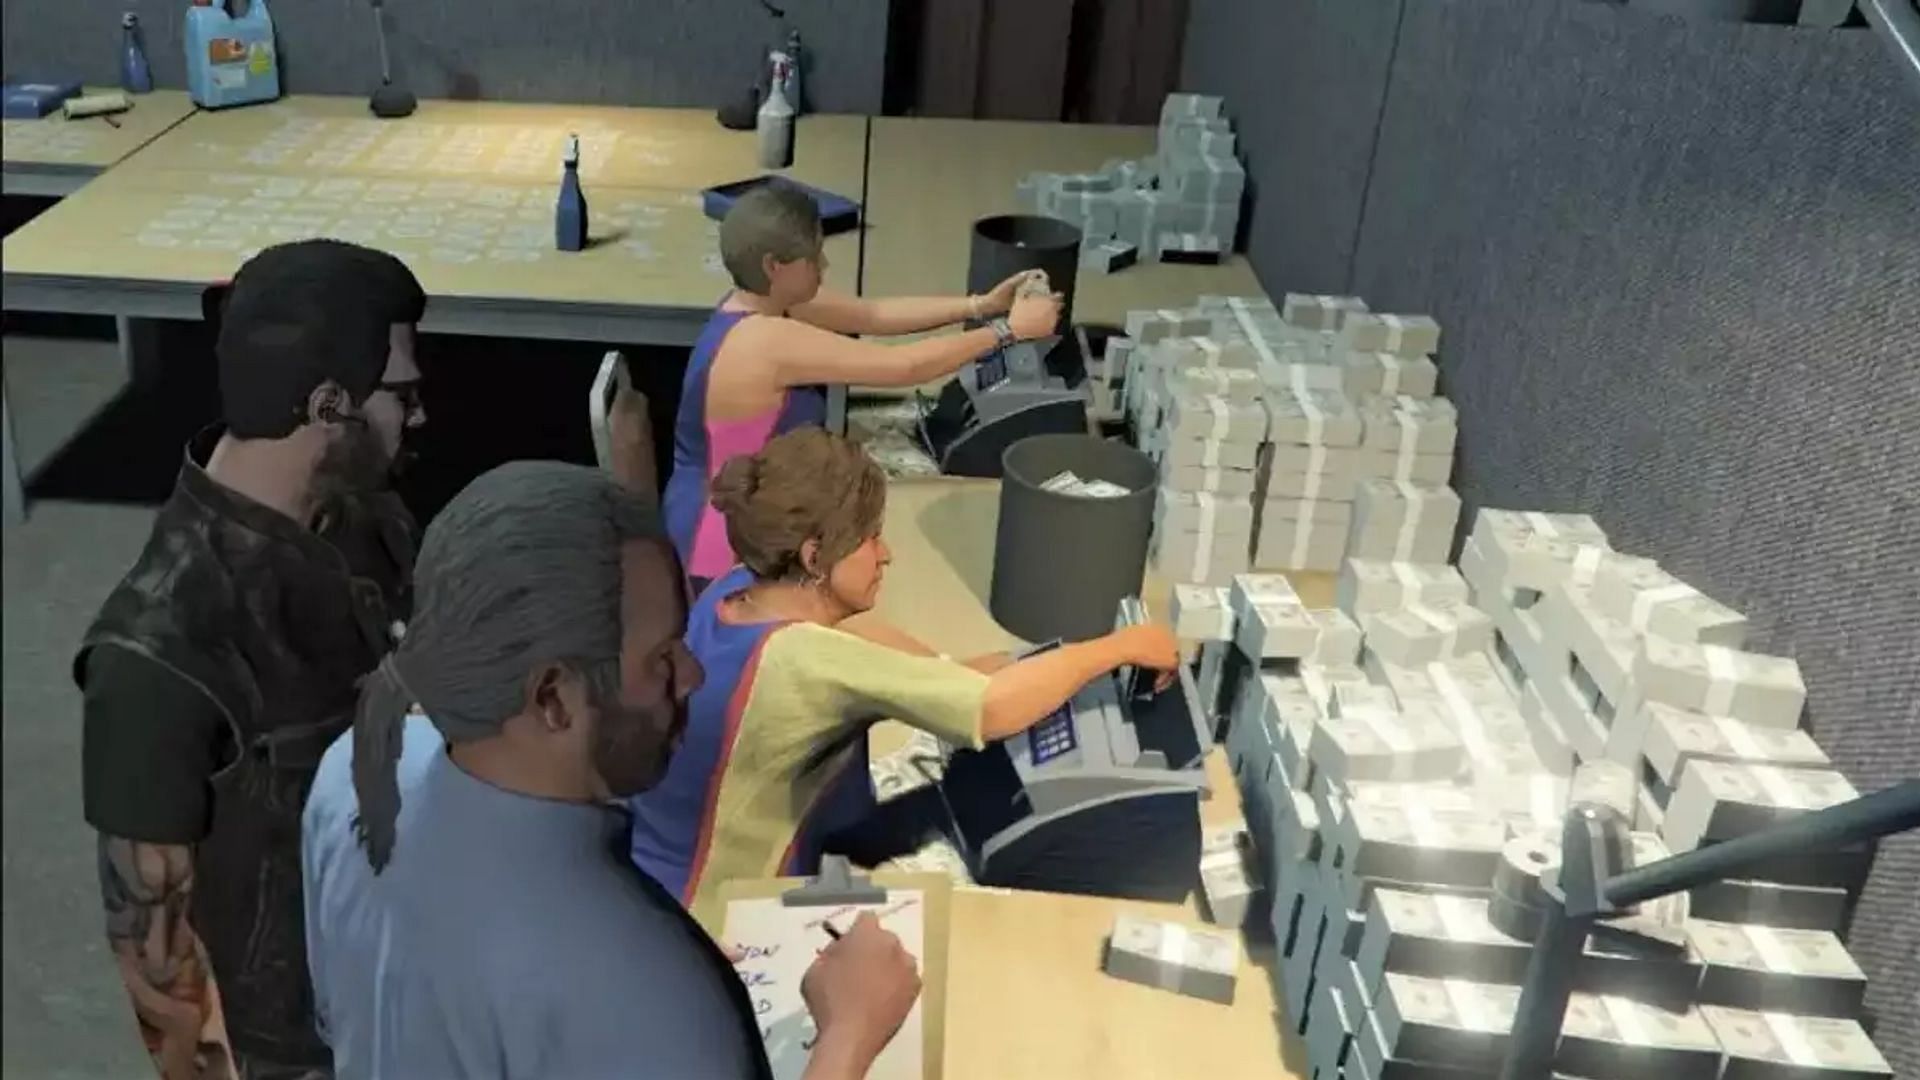 A Counterfeit Cash Factory amid some work (Image via Rockstar Games)